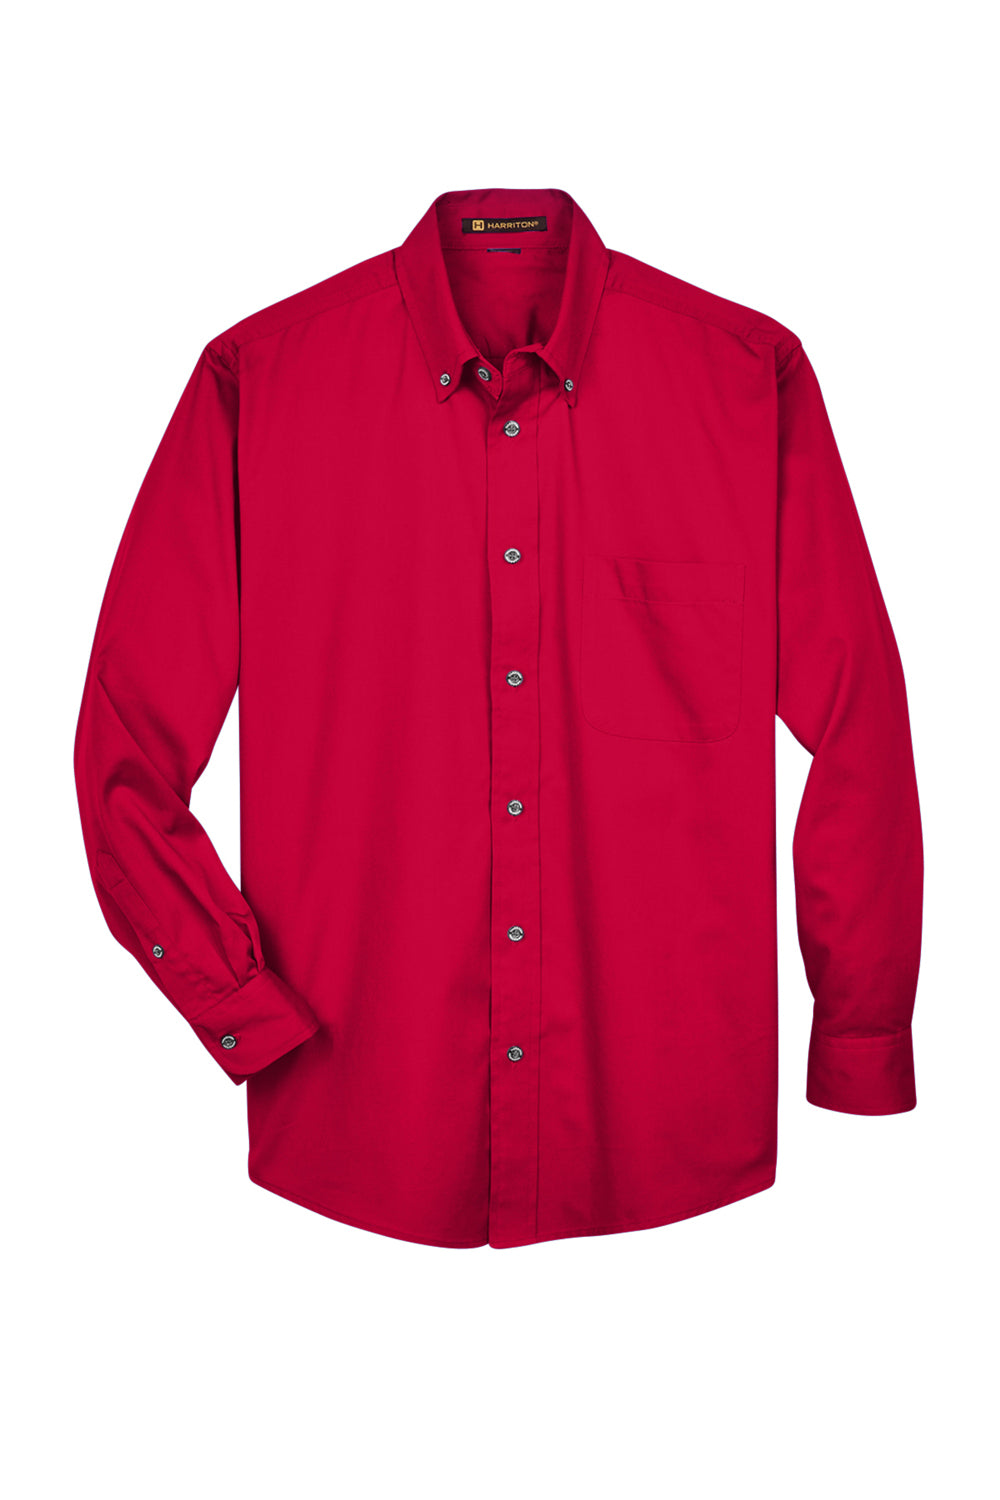 Harriton M500/M500T Wrinkle Resistant Long Sleeve Button Down Shirt w/ Pocket Red Flat Front